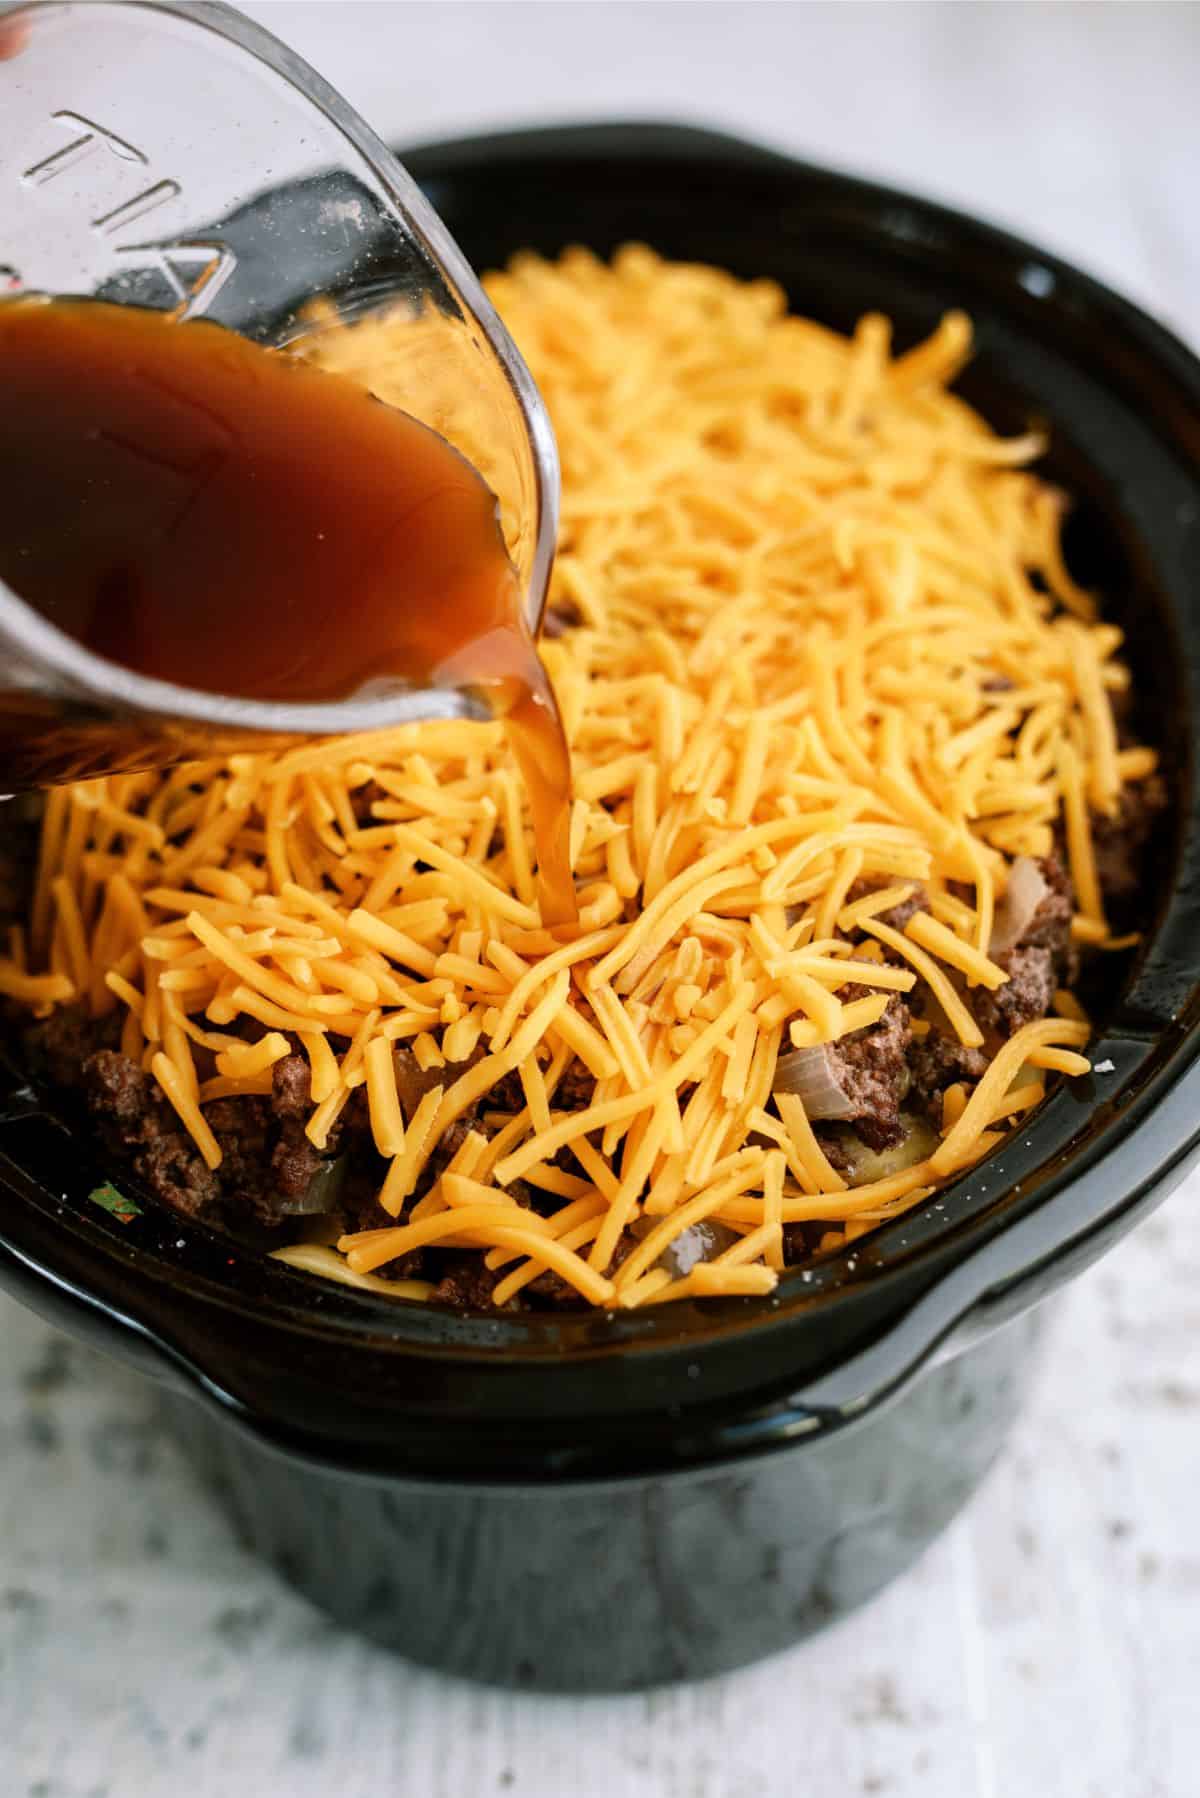 Slow Cooker Chili Cheese Casserole - The Magical Slow Cooker